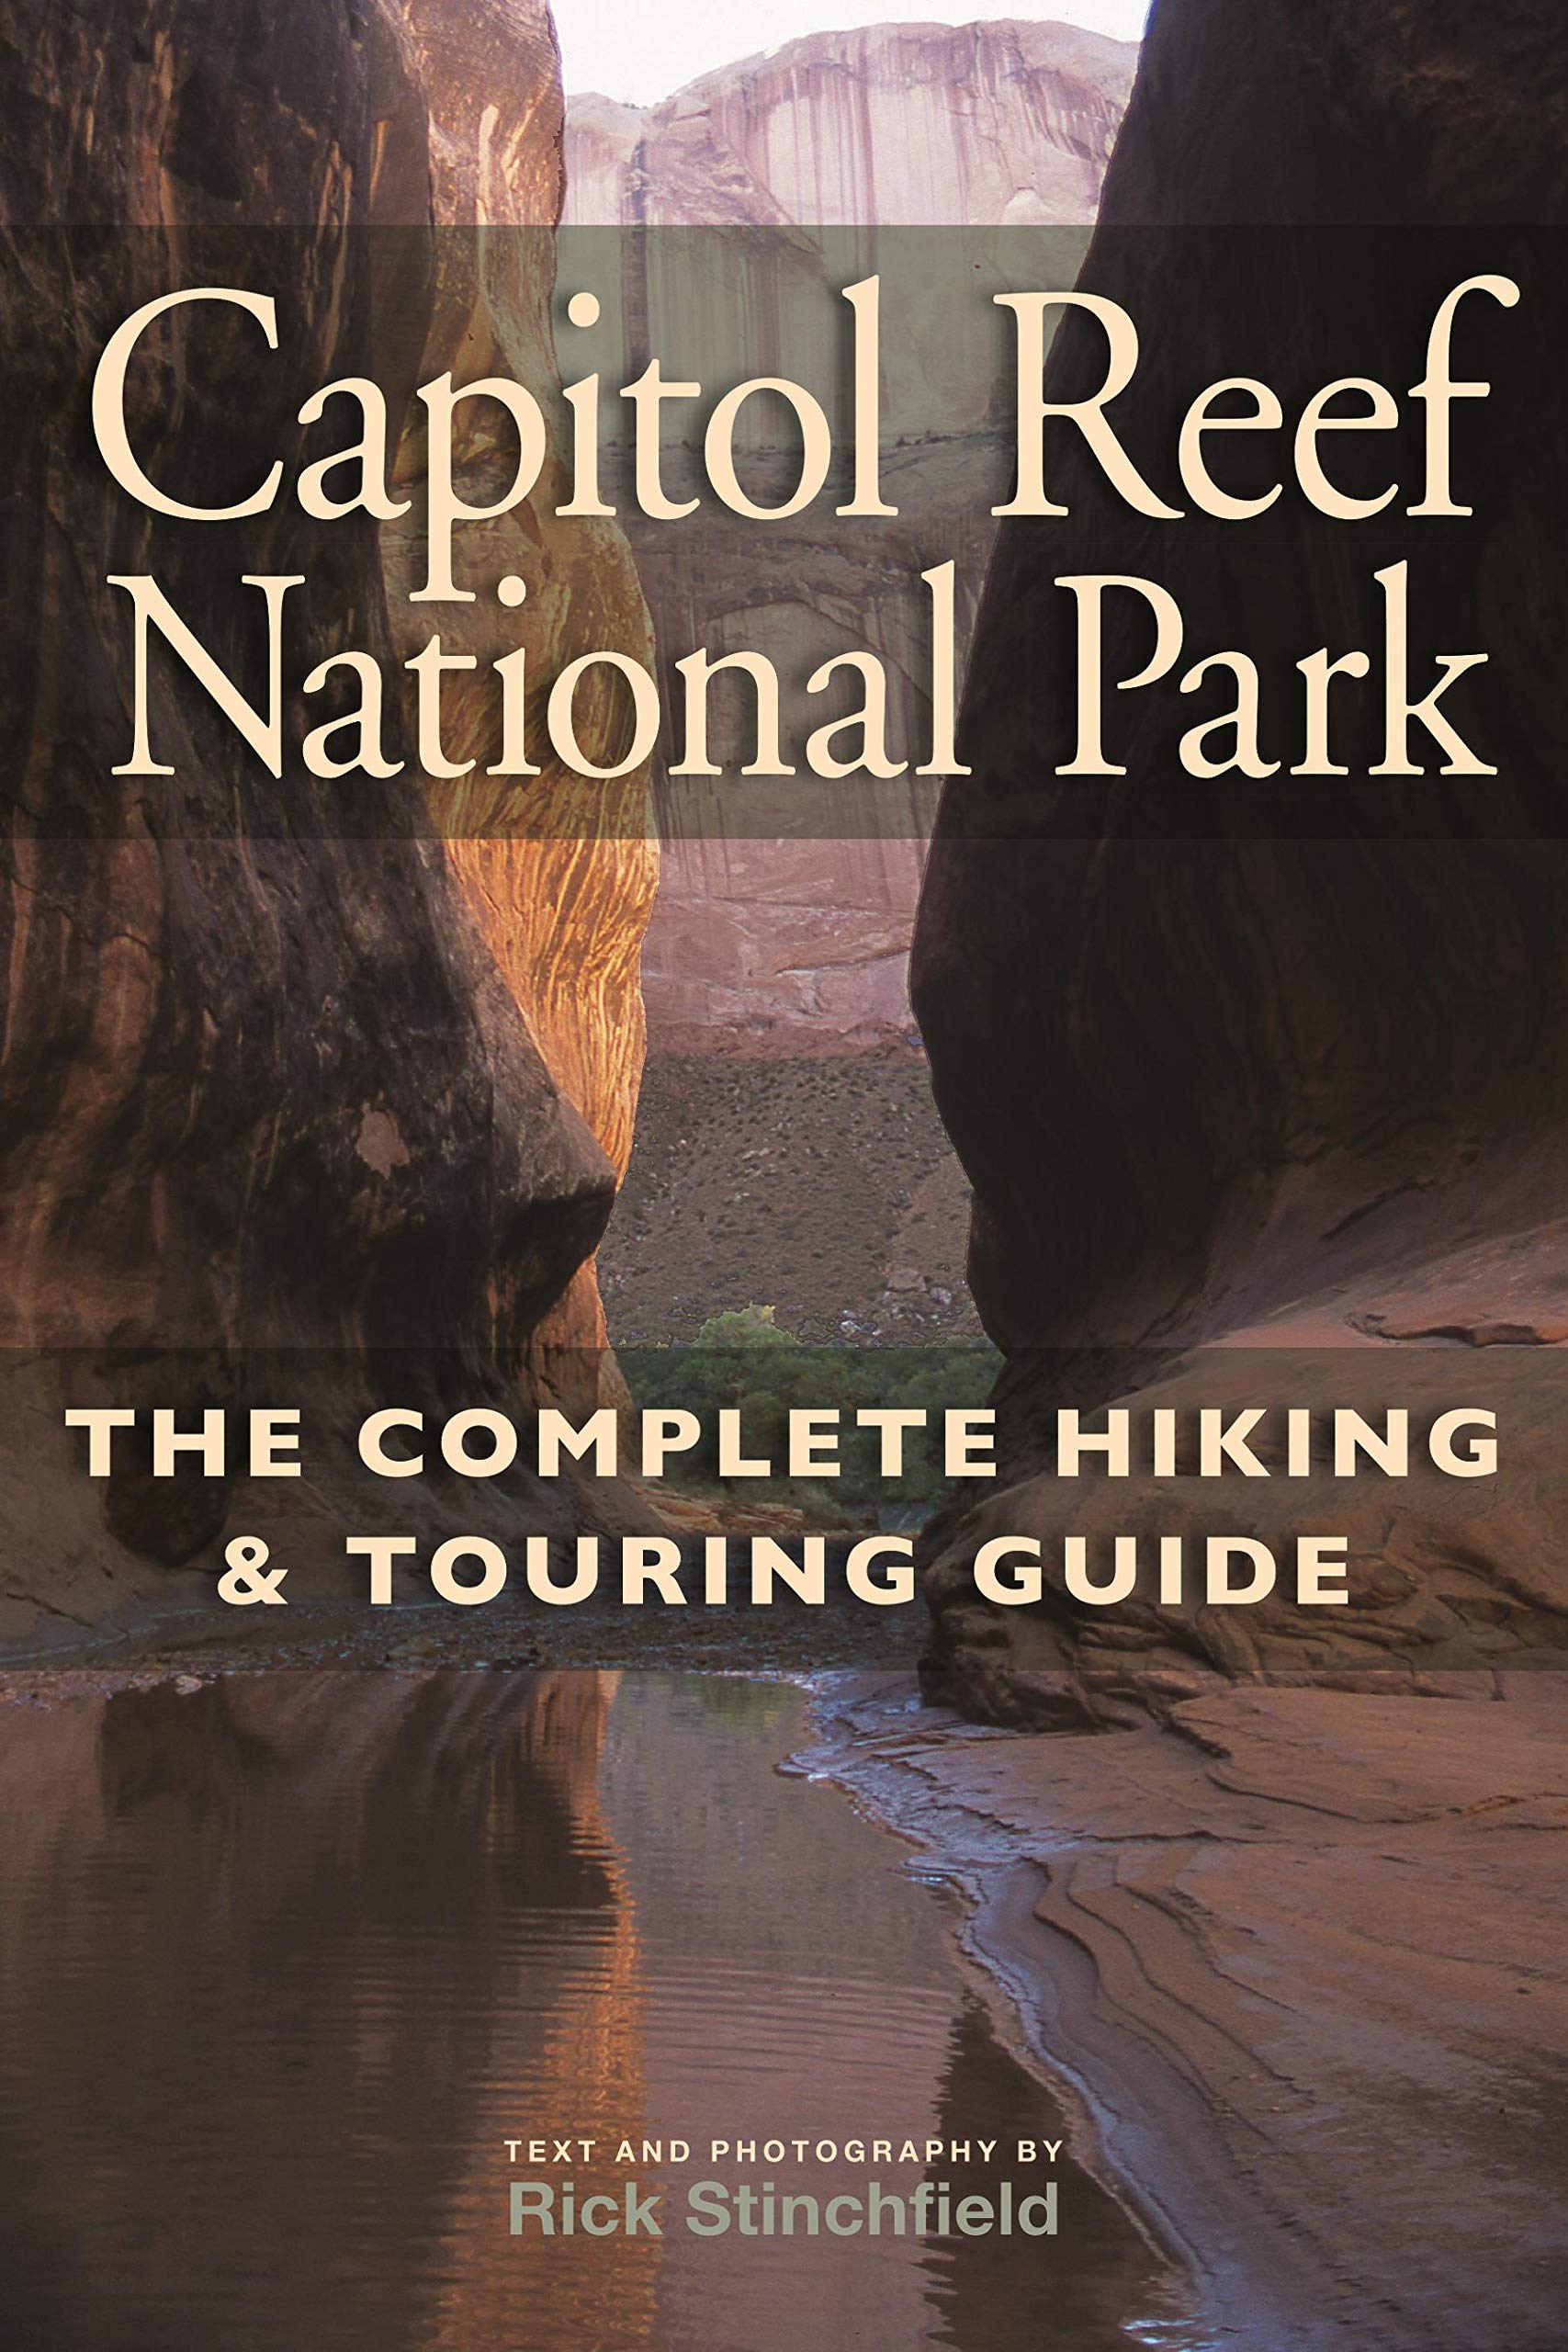 Capitol Reef National Park: The Complete Hiking & Touring Guide